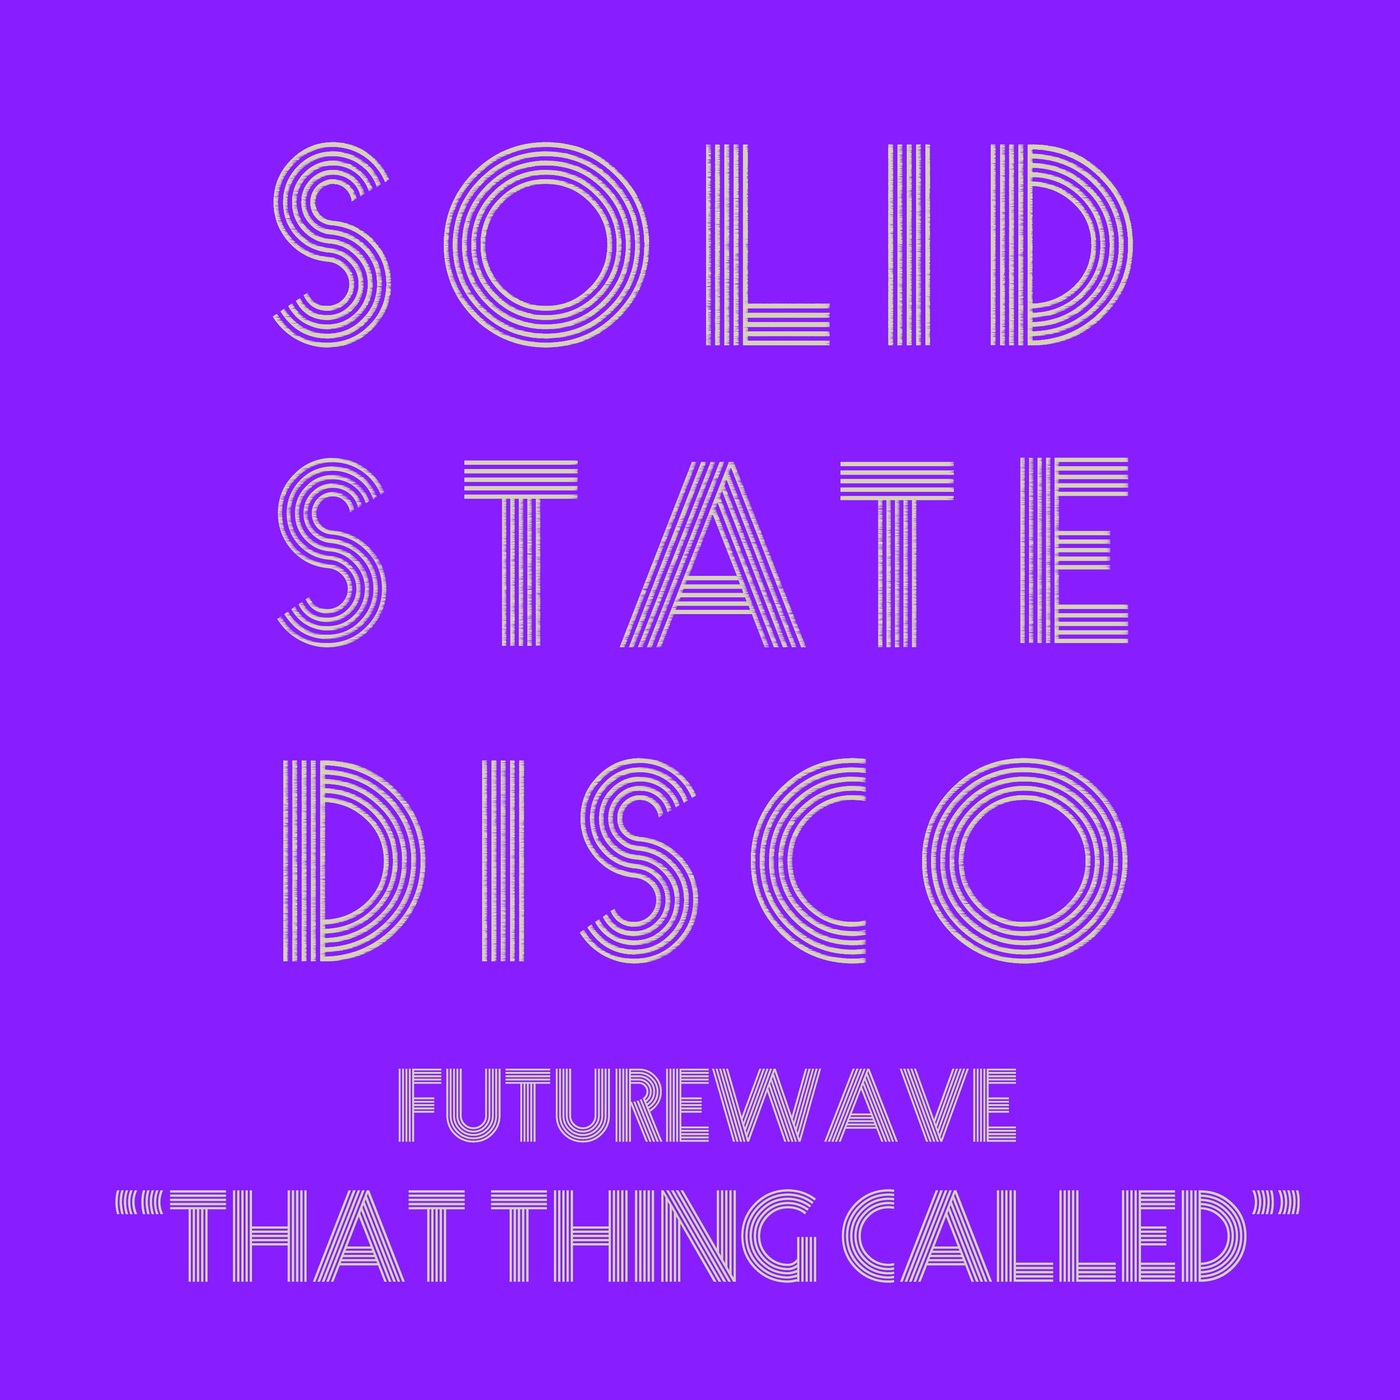 Futurewave - That Thing Called / Solid State Disco